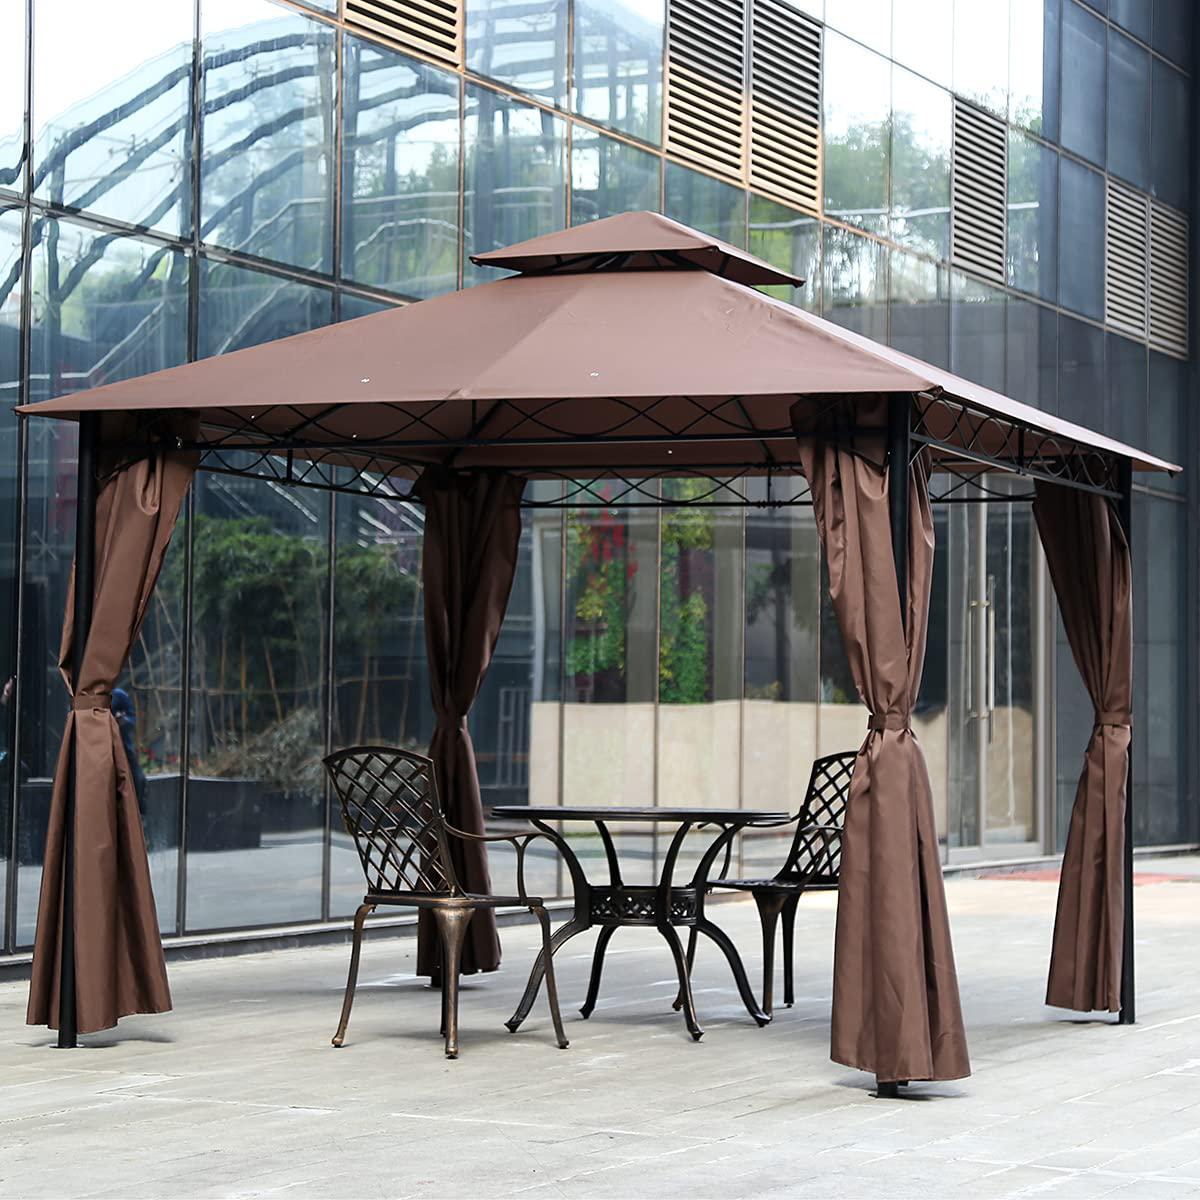 Best Home Product 10x13 square gazebo canopy tent with frame and fabric, heavy duty patio outdoor canopy tent,waterproof outdoor tents for back